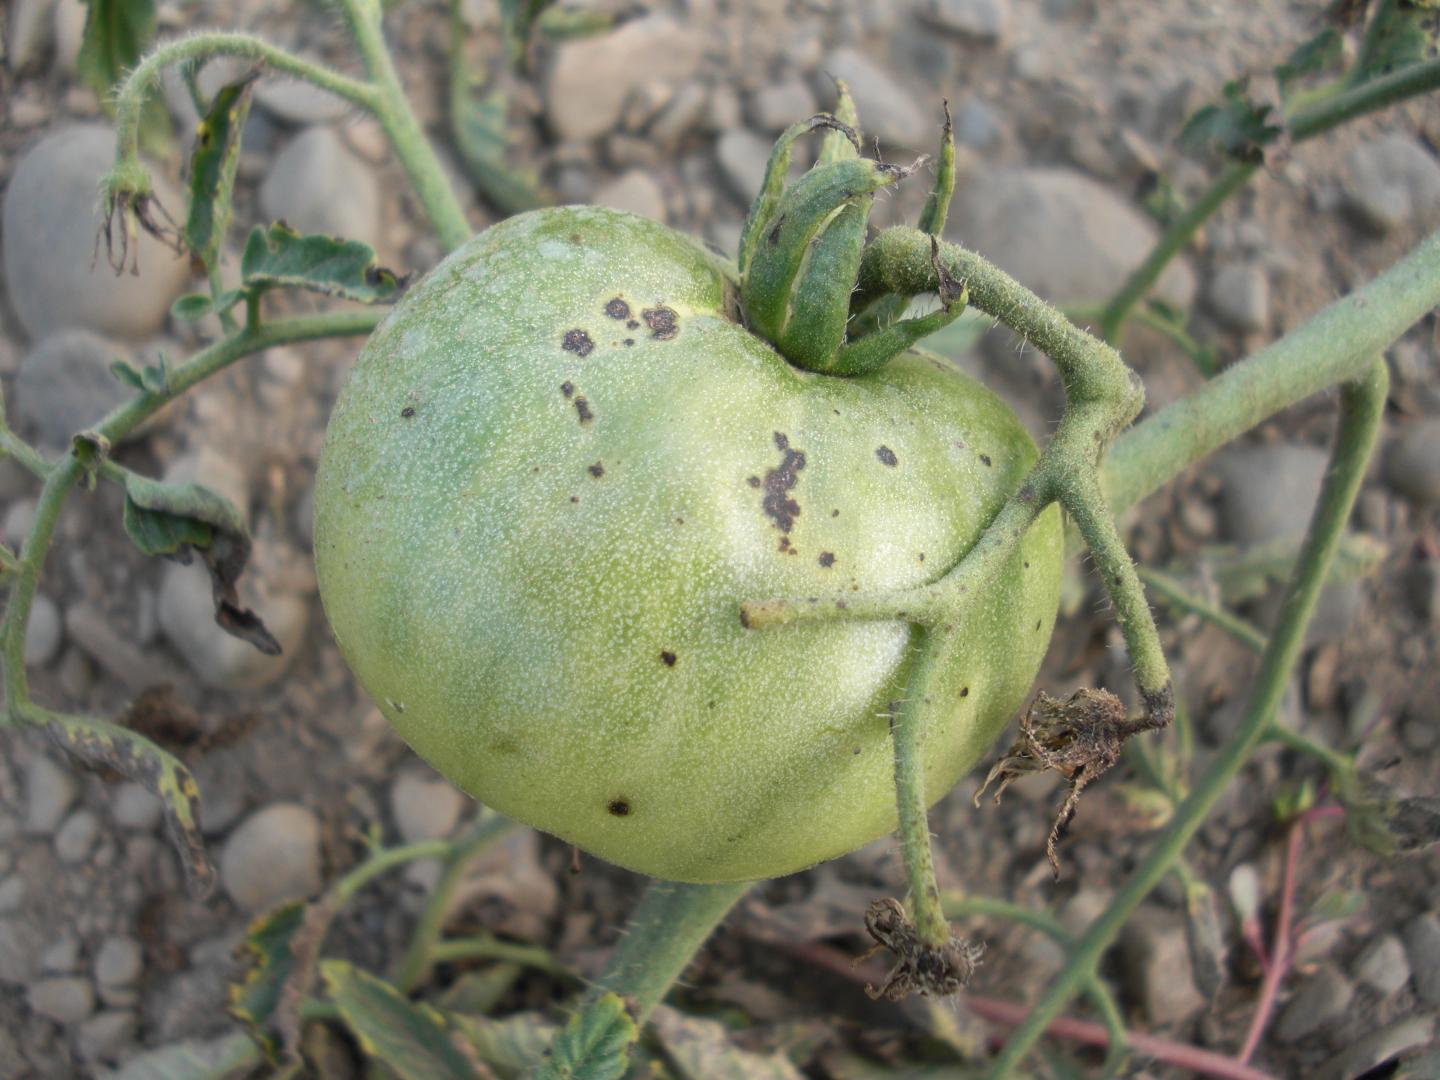 Tomato with Speck Disease